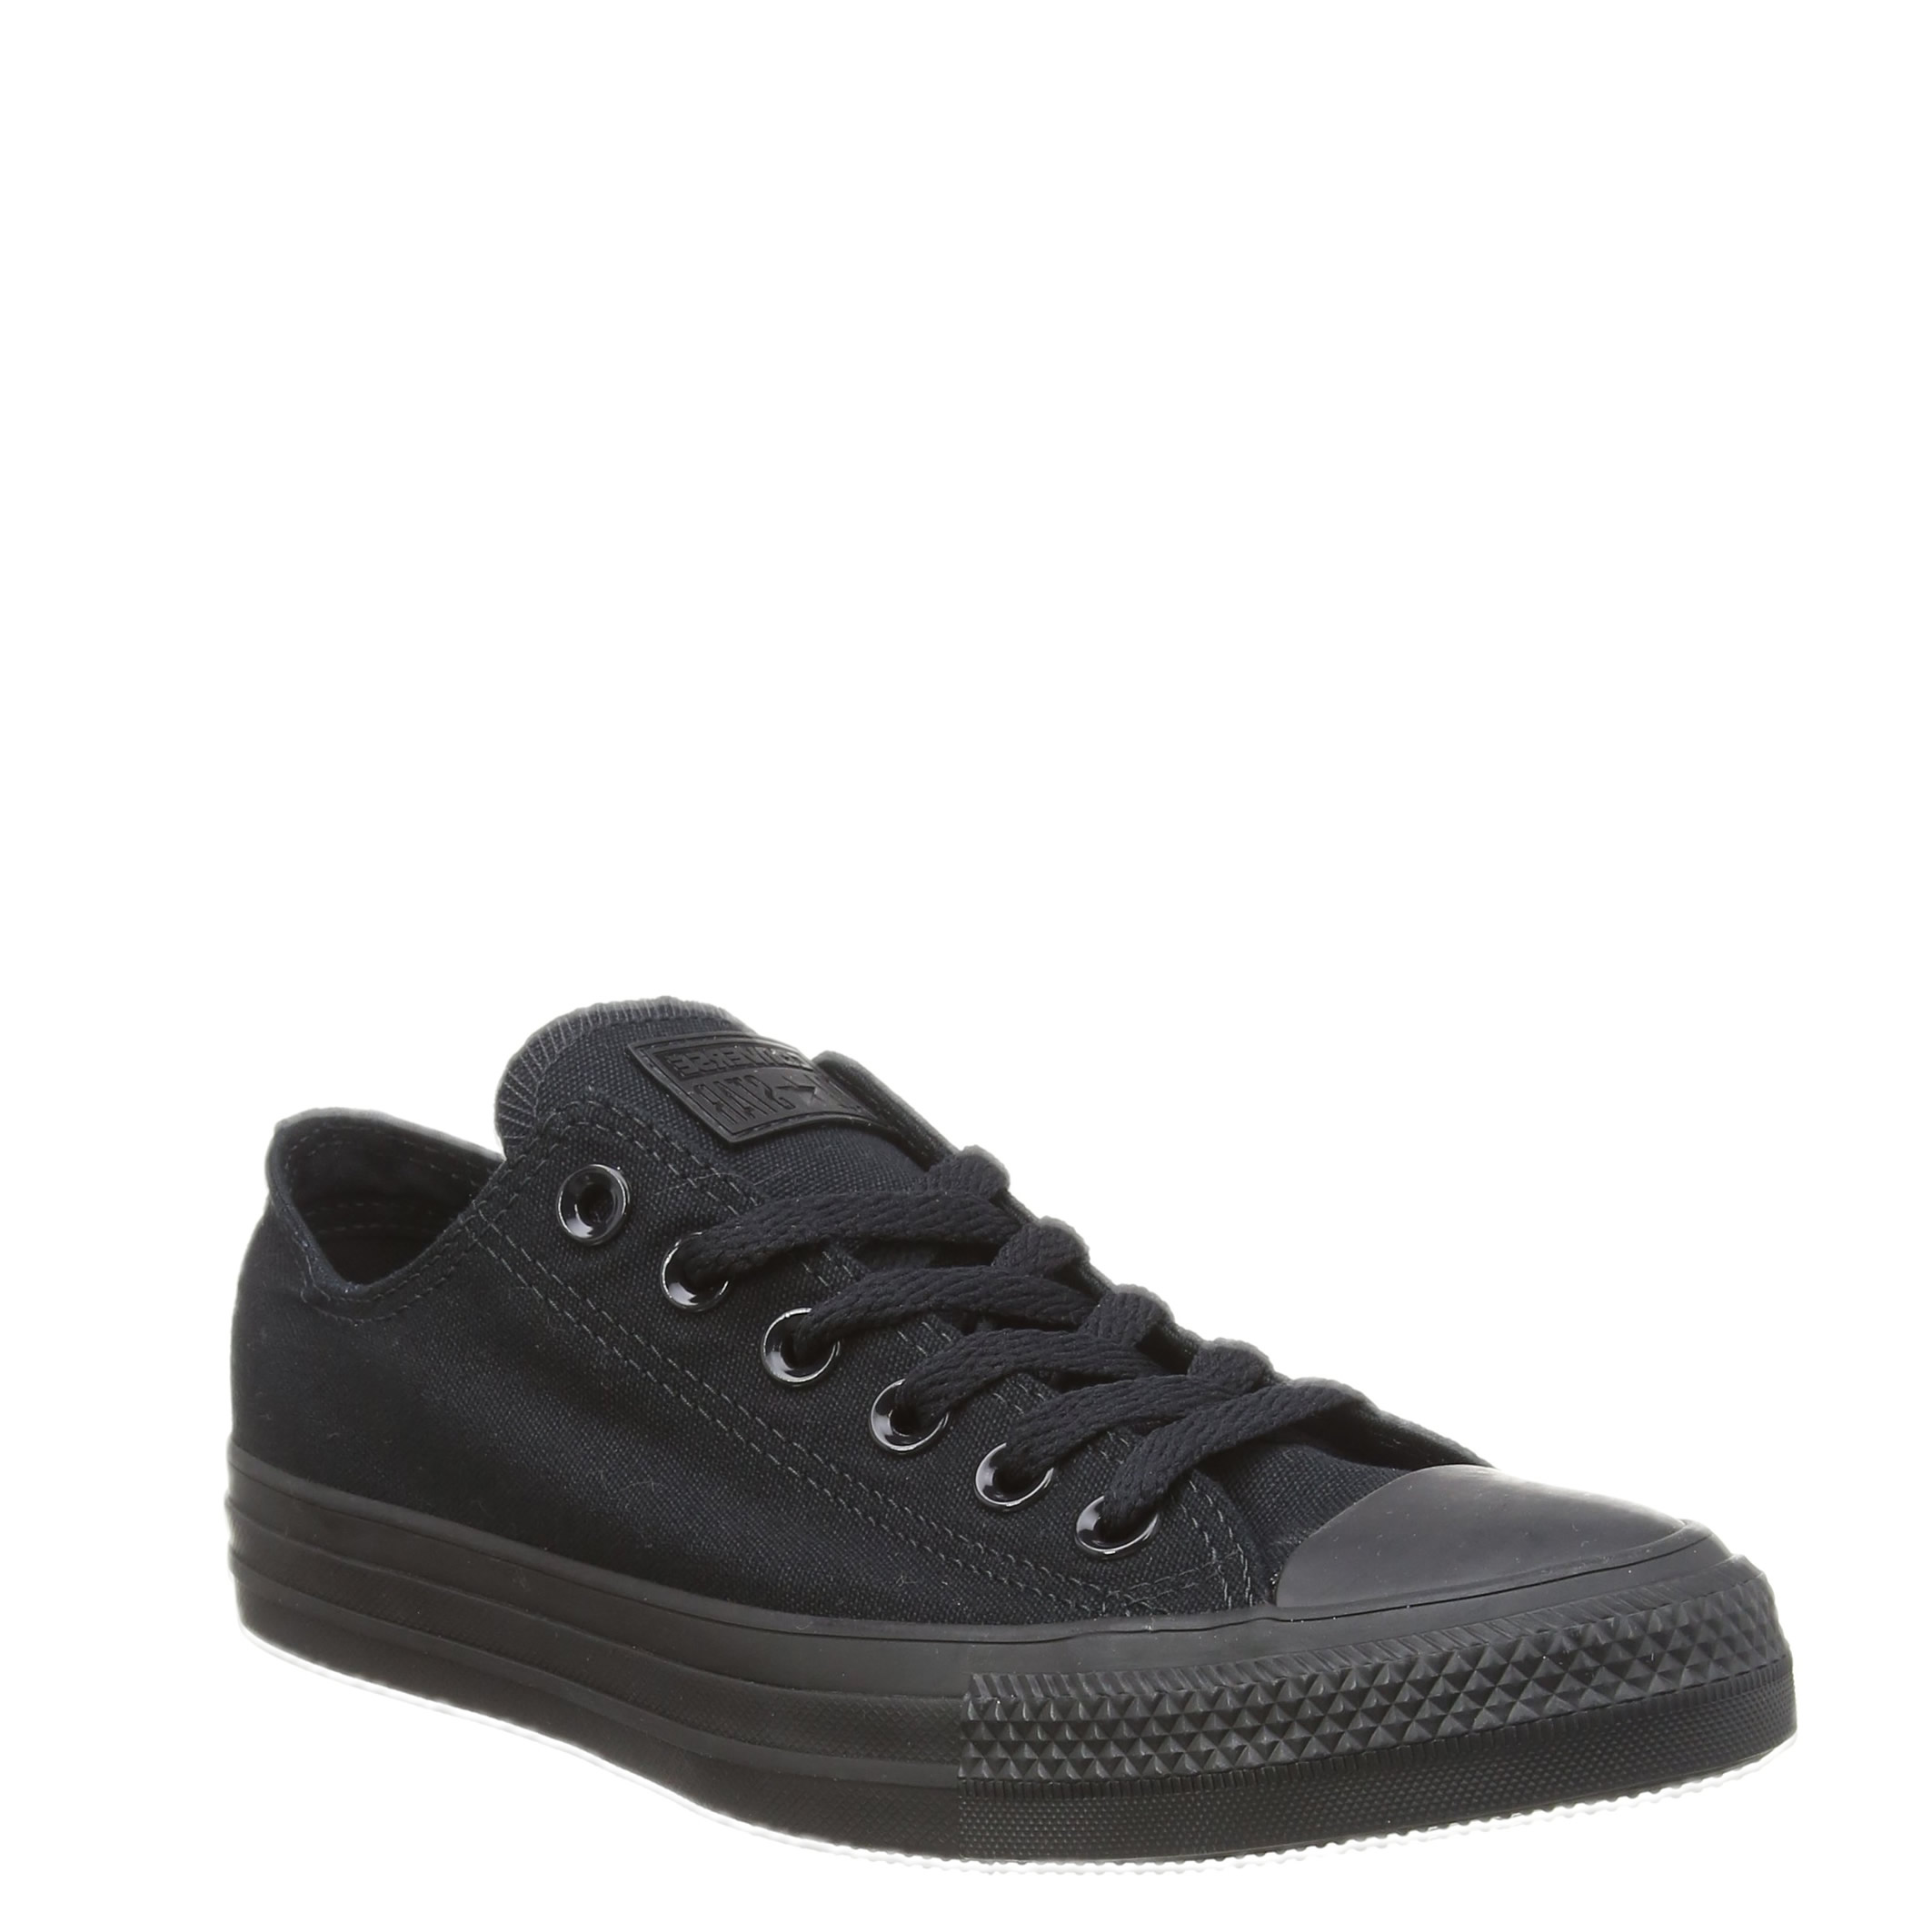 Converse Star Low -Top All Star Chuck Taylor Trainer in Mono Black ...